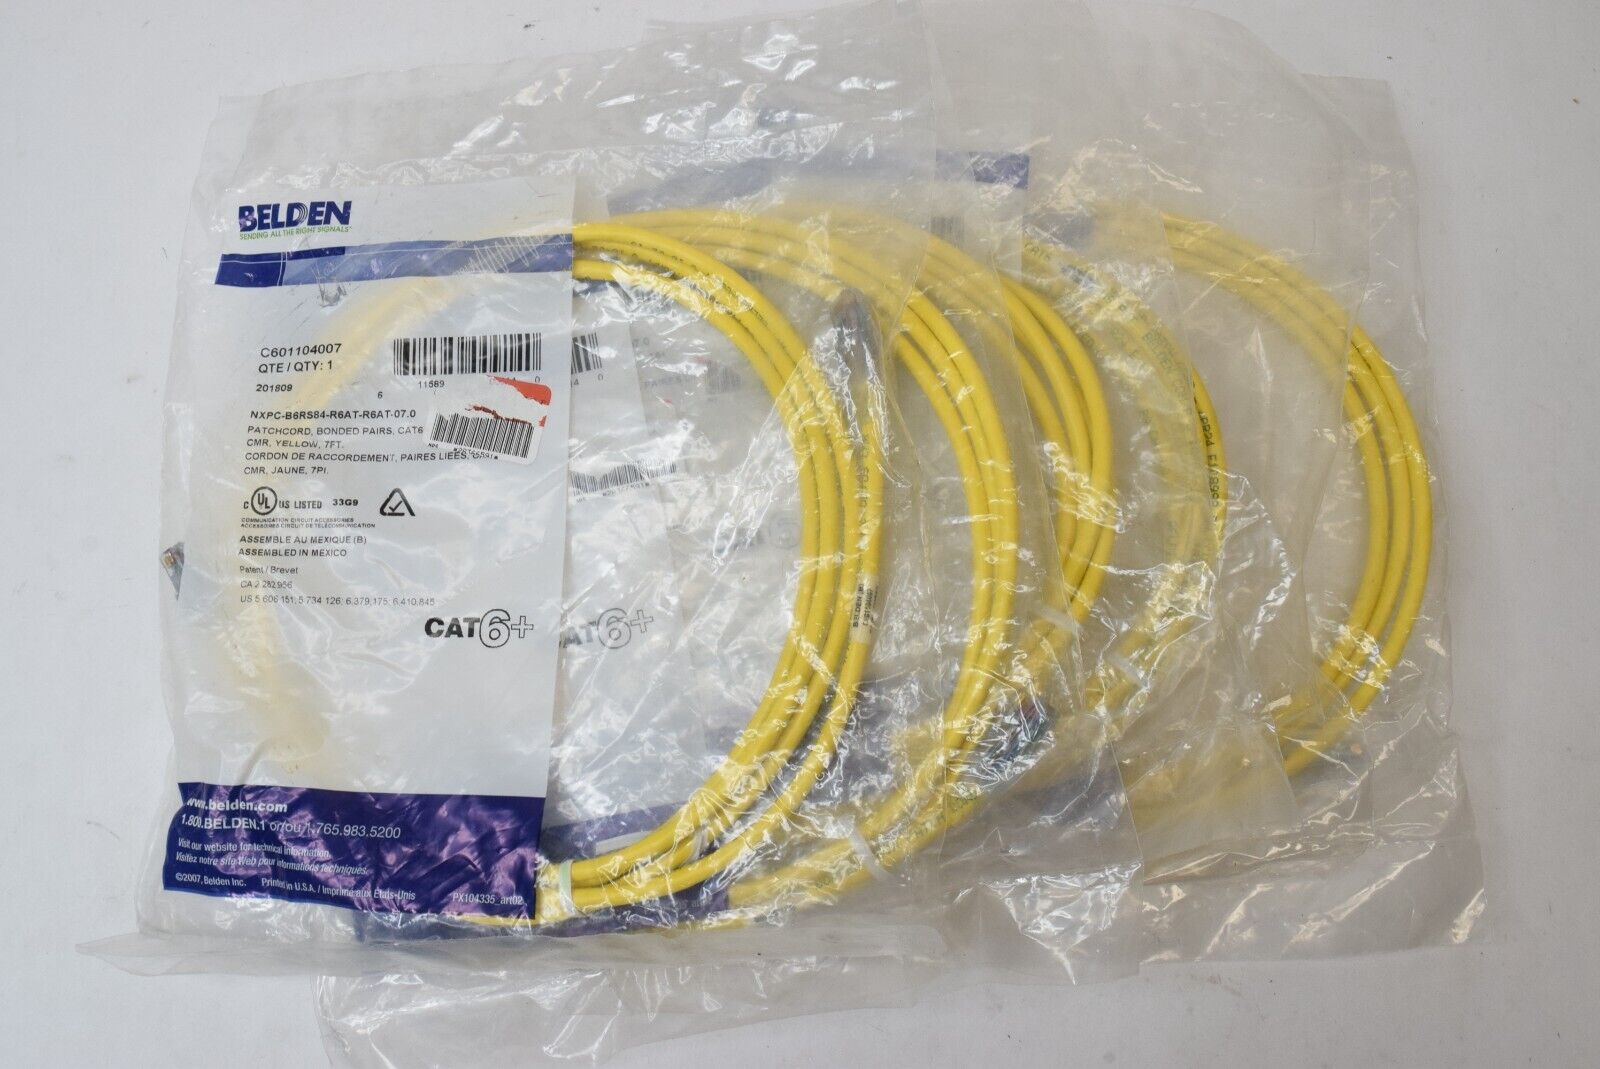 Belden CAT6+ Bonded-Pair 24 AWG Solid CMR Patch Cable Cord C601104007 - Lot of 6